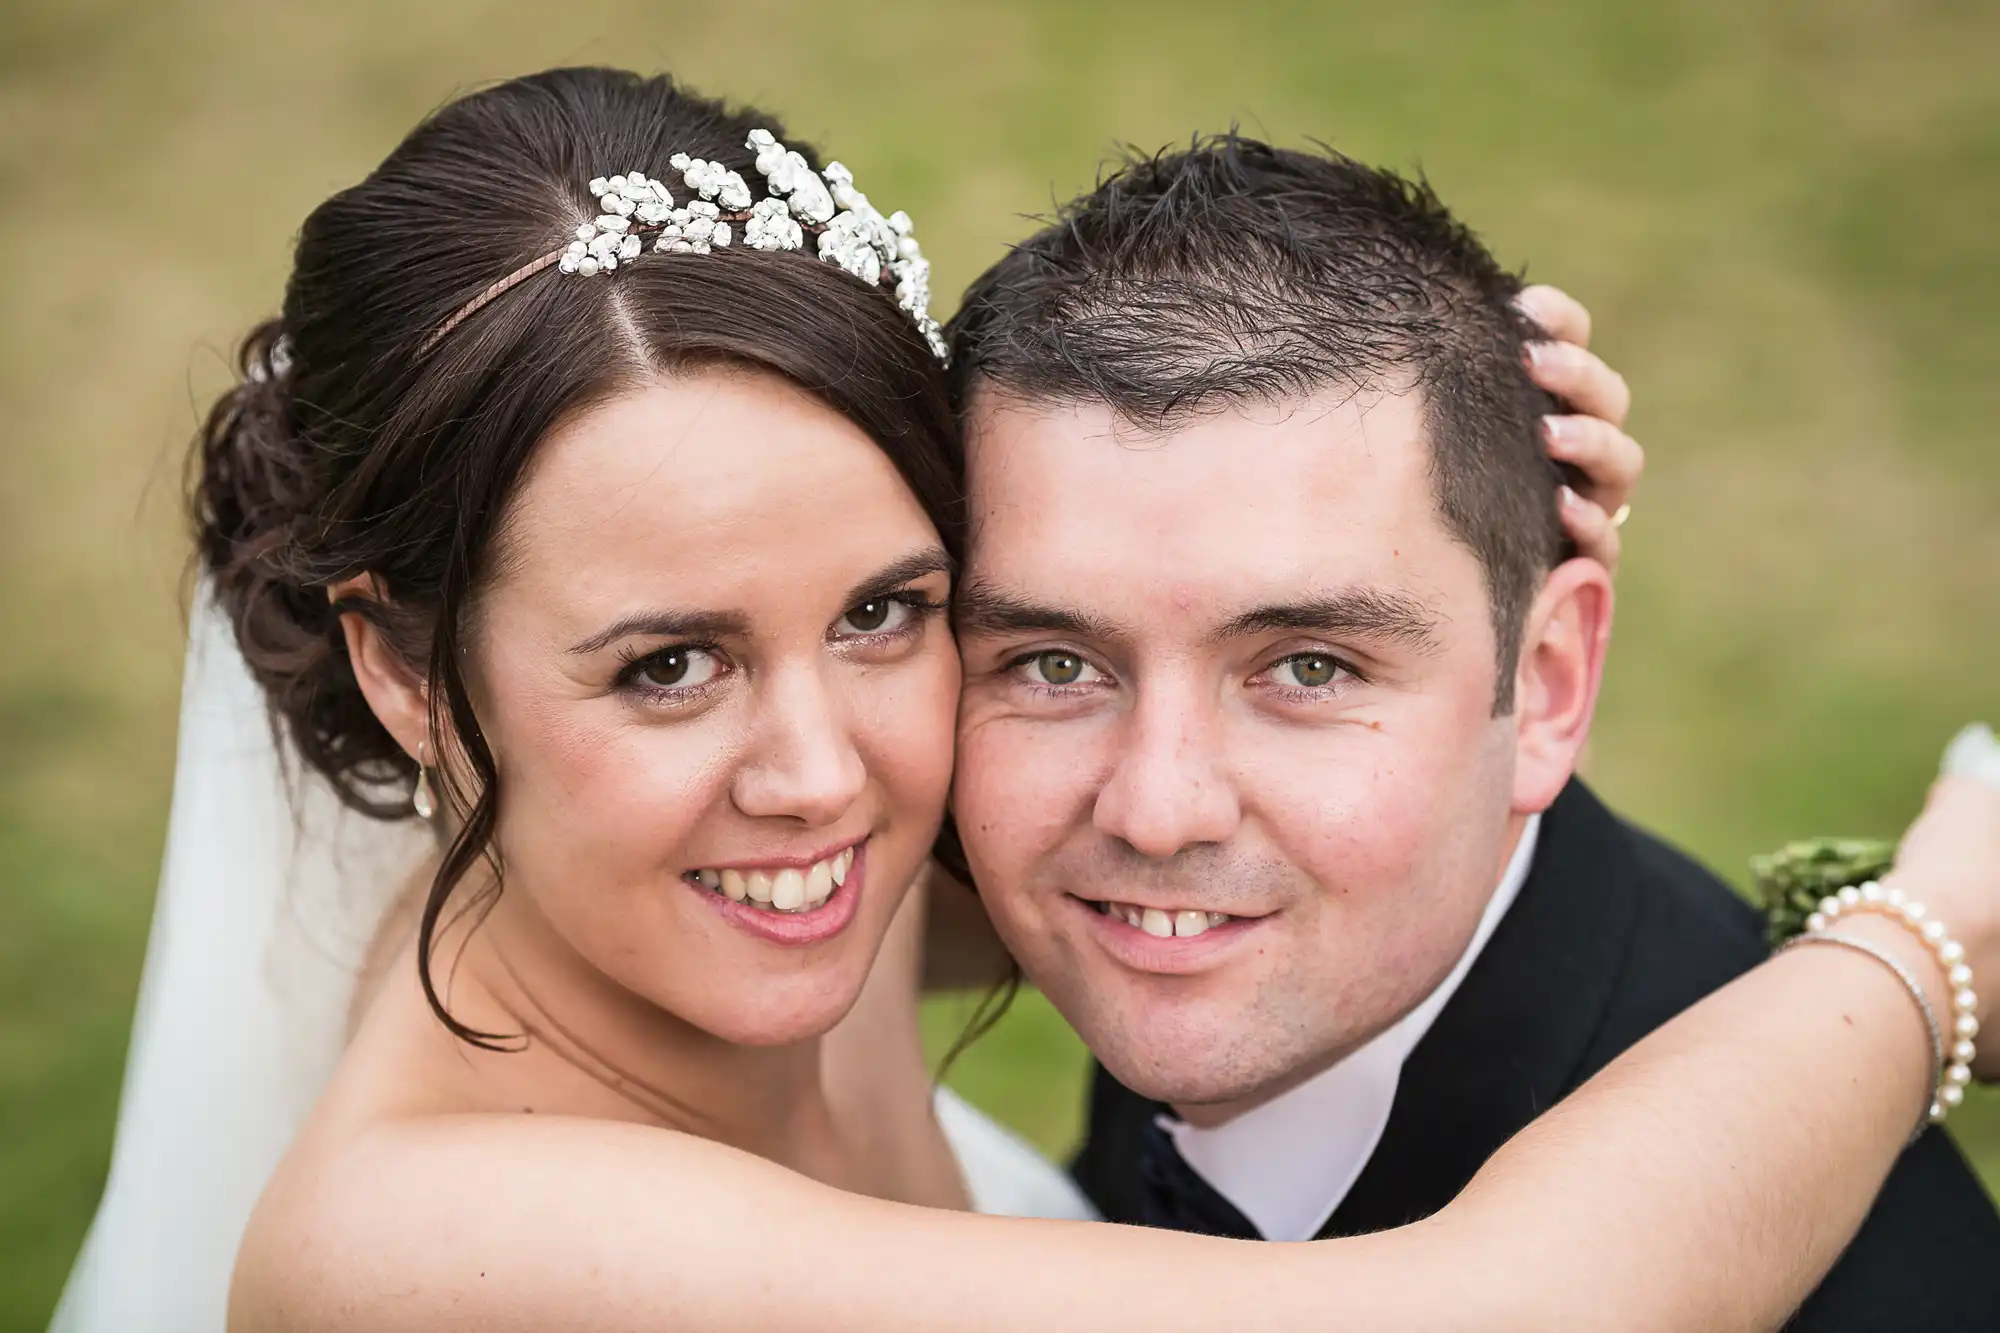 Close-up portrait of a smiling bride and groom outdoors, the bride wearing a tiara and veil, the groom in a black suit.